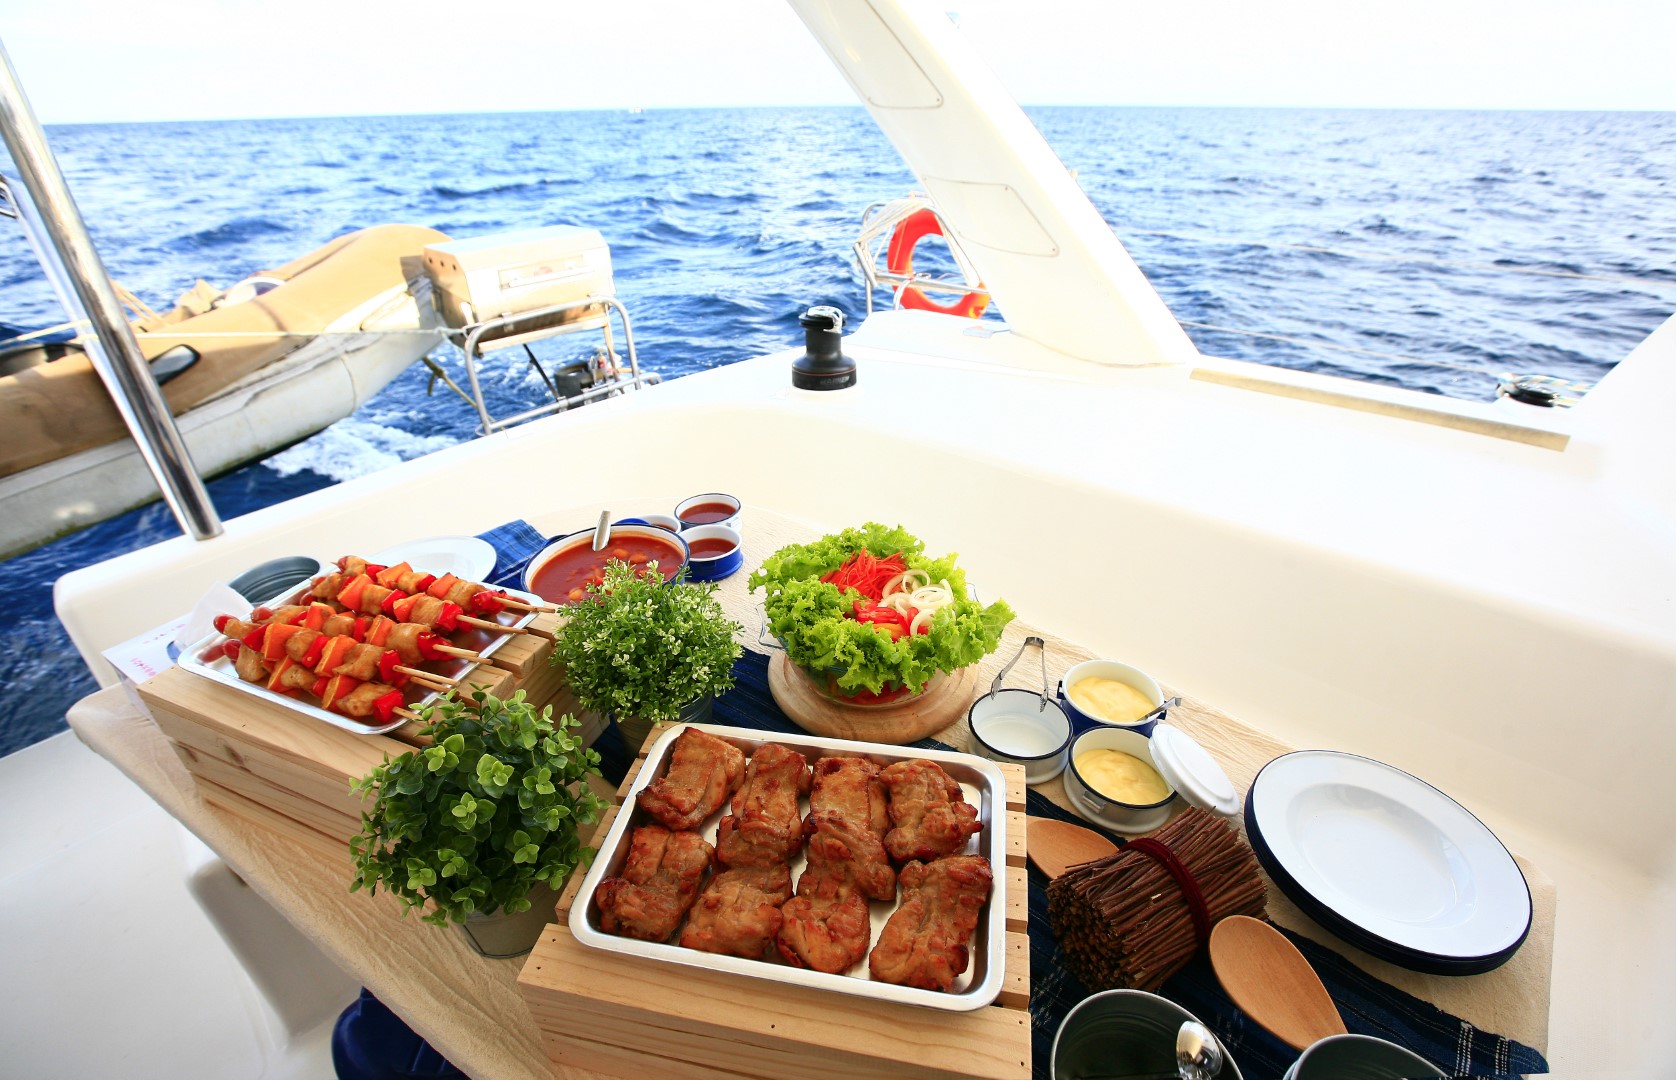 10 Simple Meals Ideas for Your Sailing Holiday - SailingEurope Blog